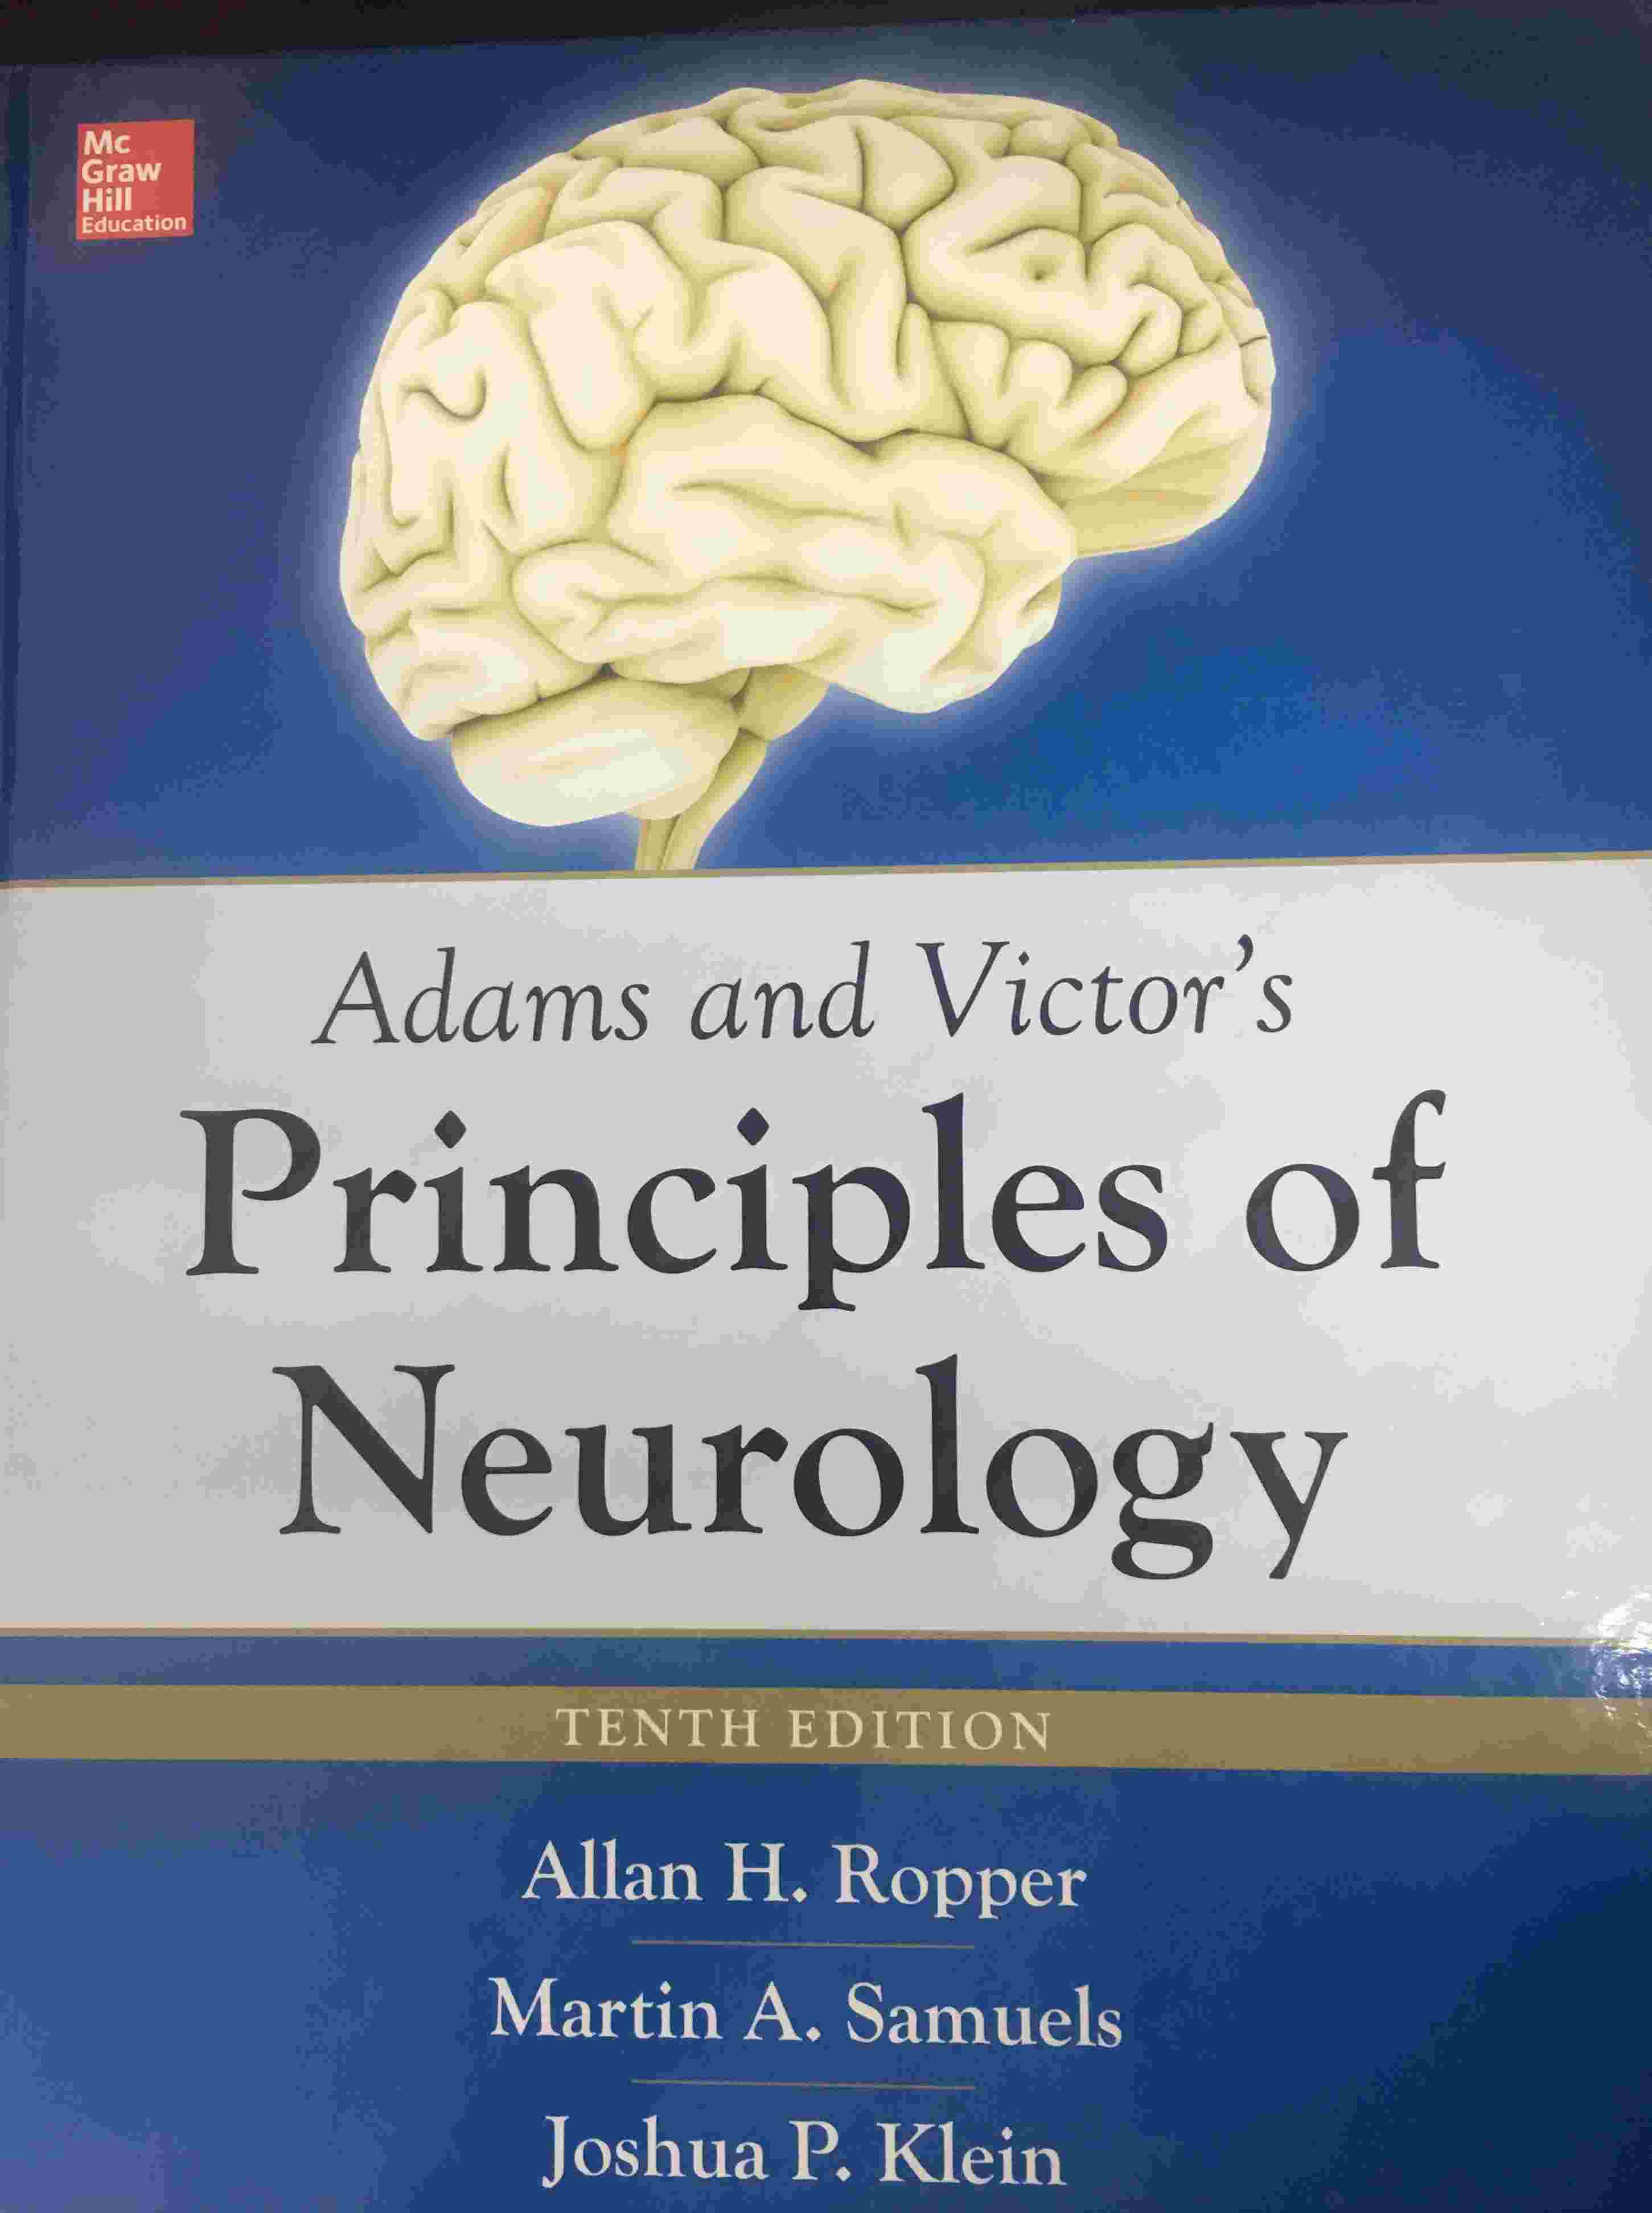 «Adams and Victor’s Principles of Neurology »